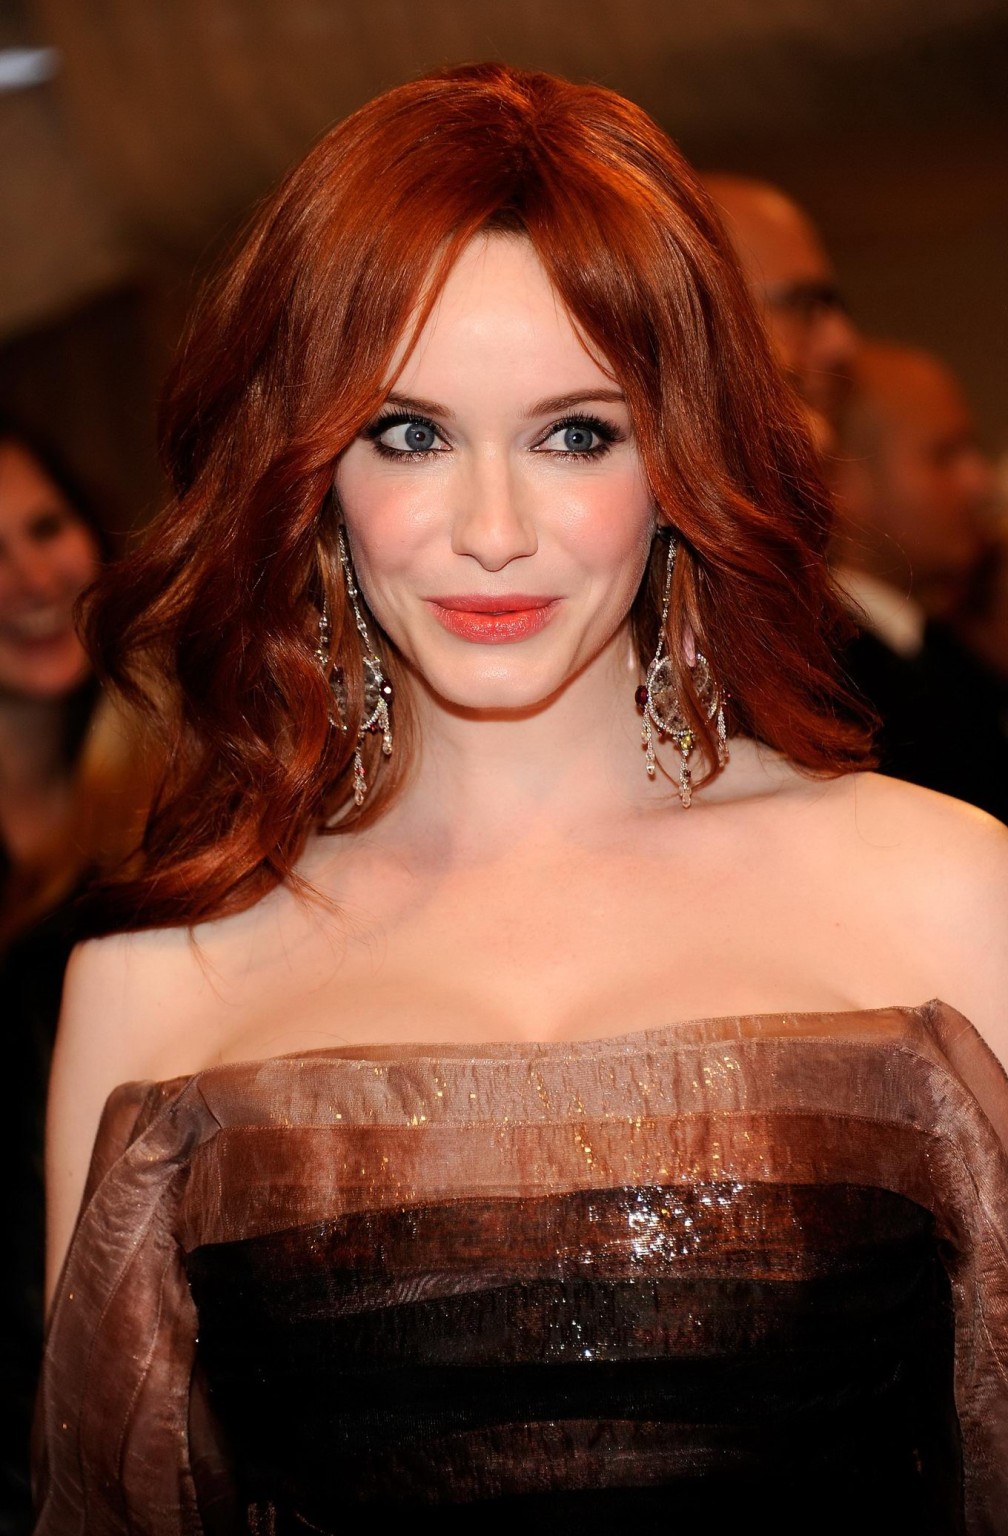 Christina Hendricks Busty Wearing Low Cut Dress At The Benefit Gala In